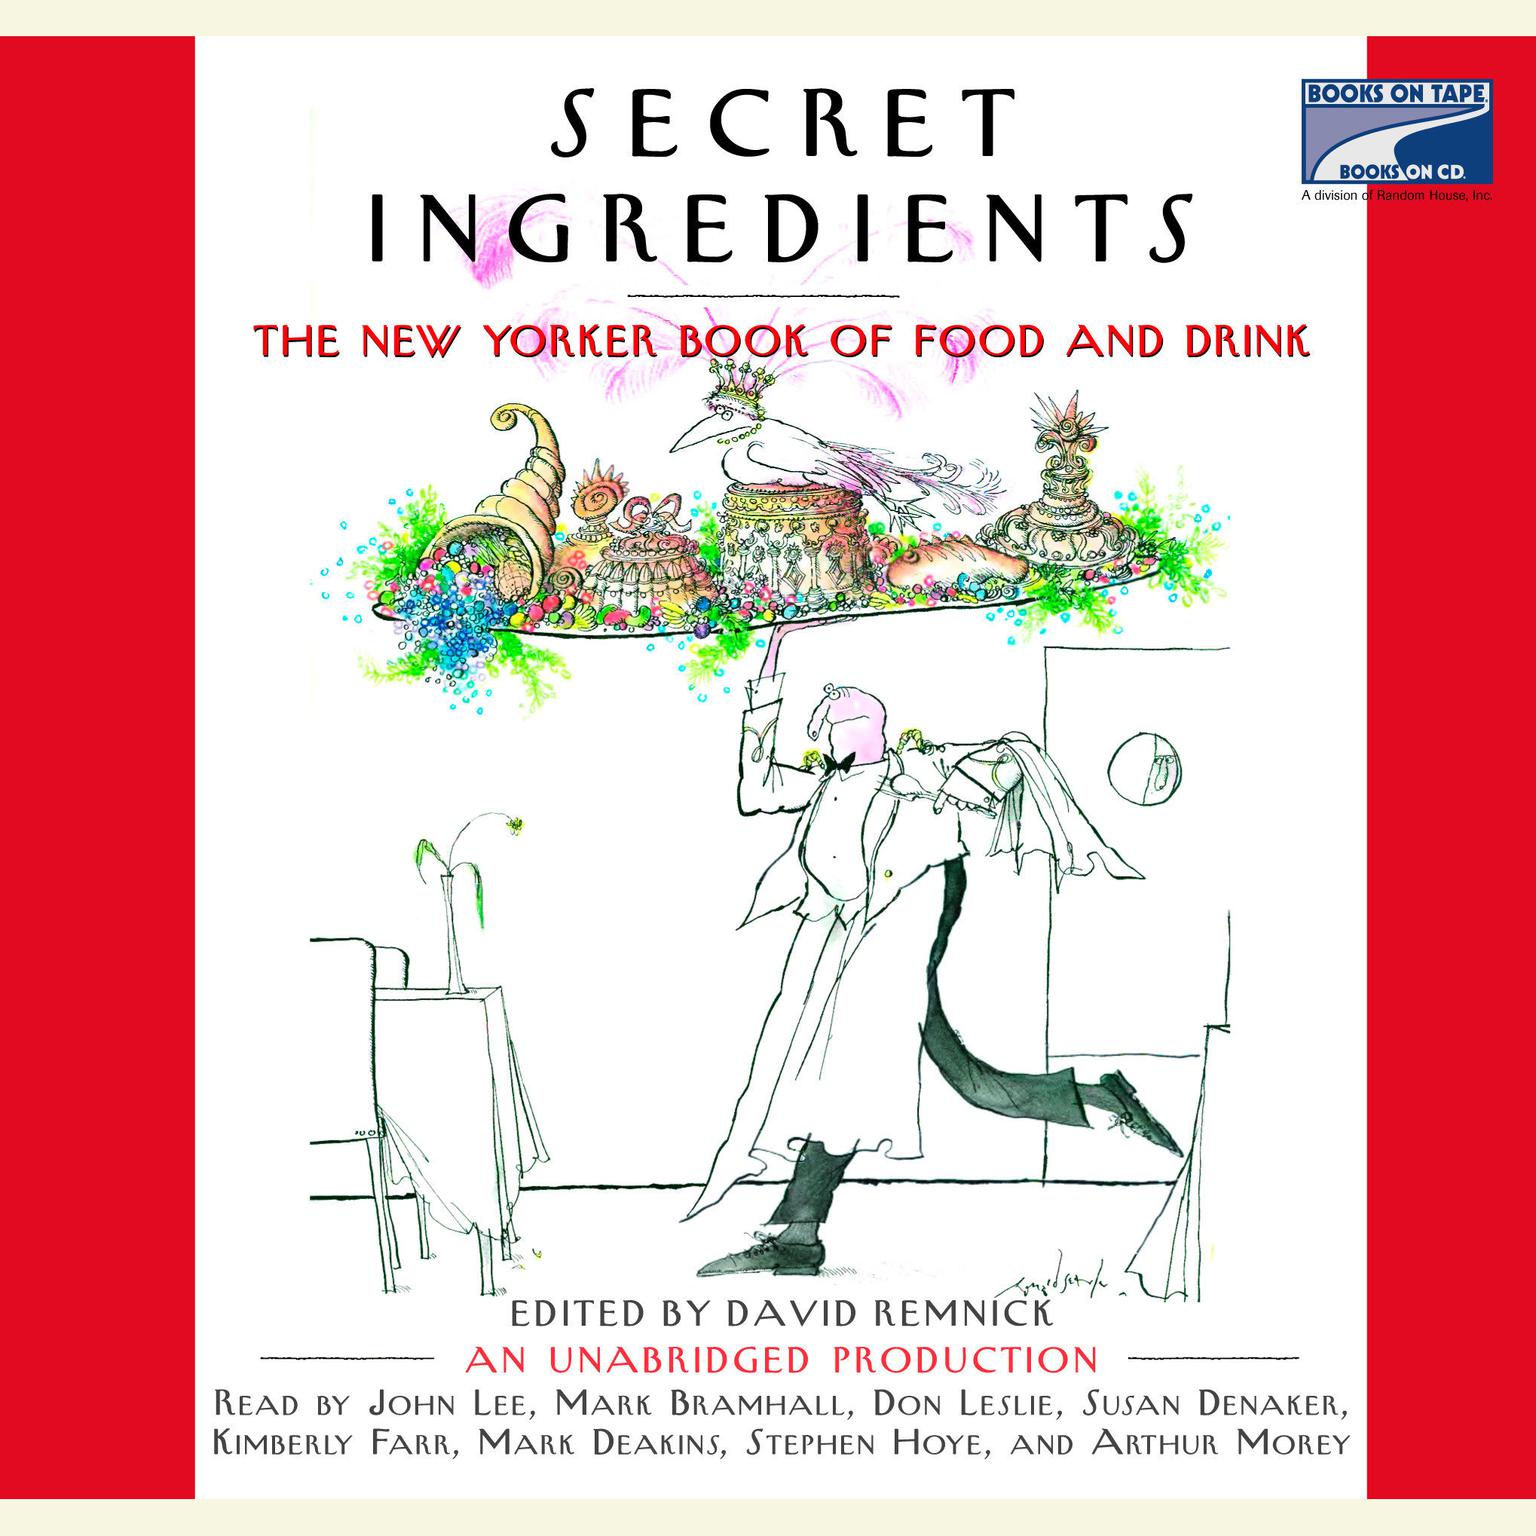 Secret Ingredients (Abridged): The New Yorker Book of Food and Drink: Unabridged Selections Audiobook, by David Remnick